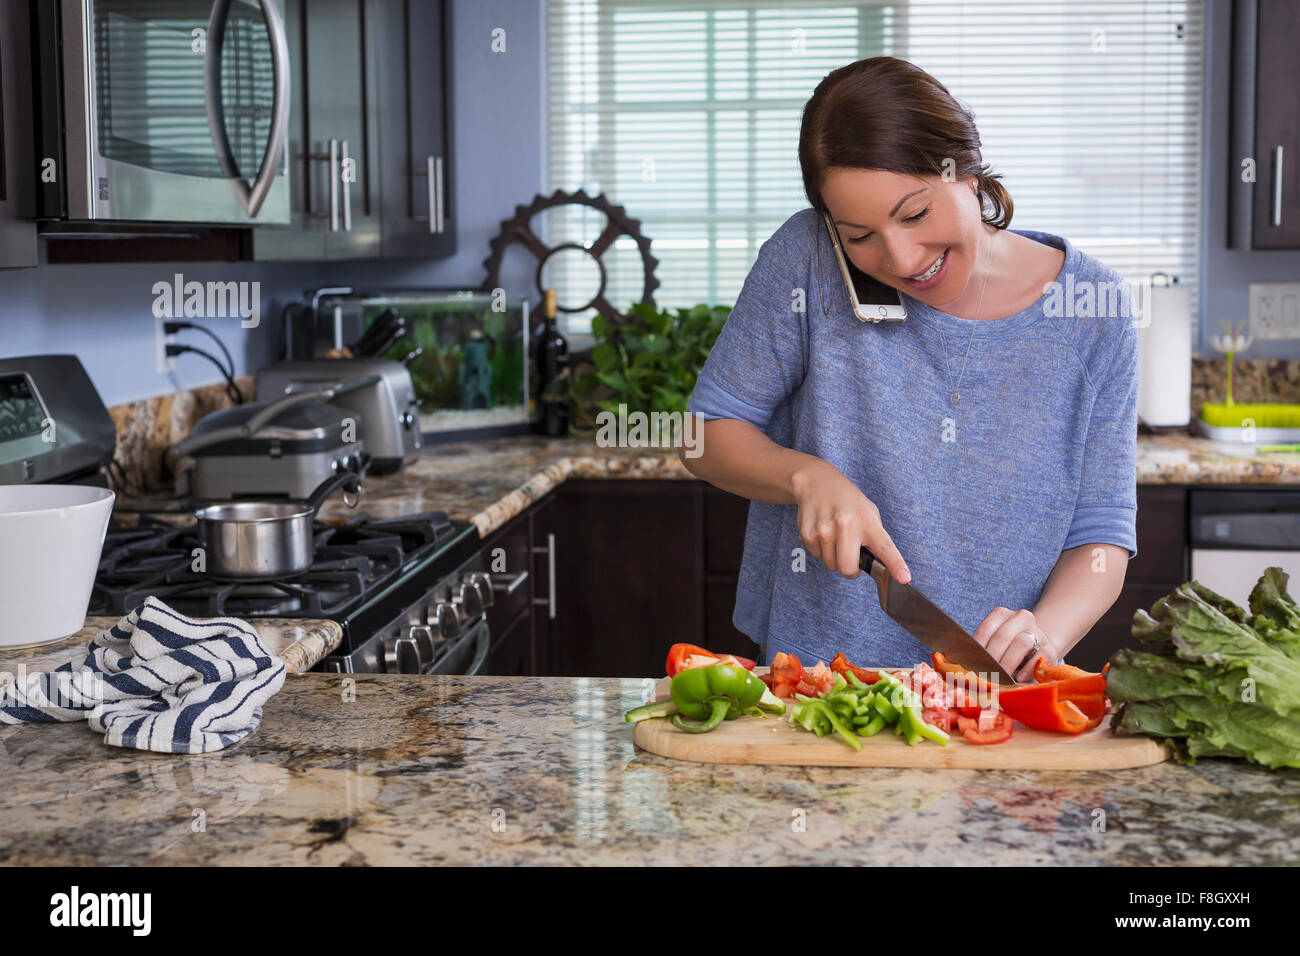 Mixed race woman talking on phone and chopping vegetables Stock Photo